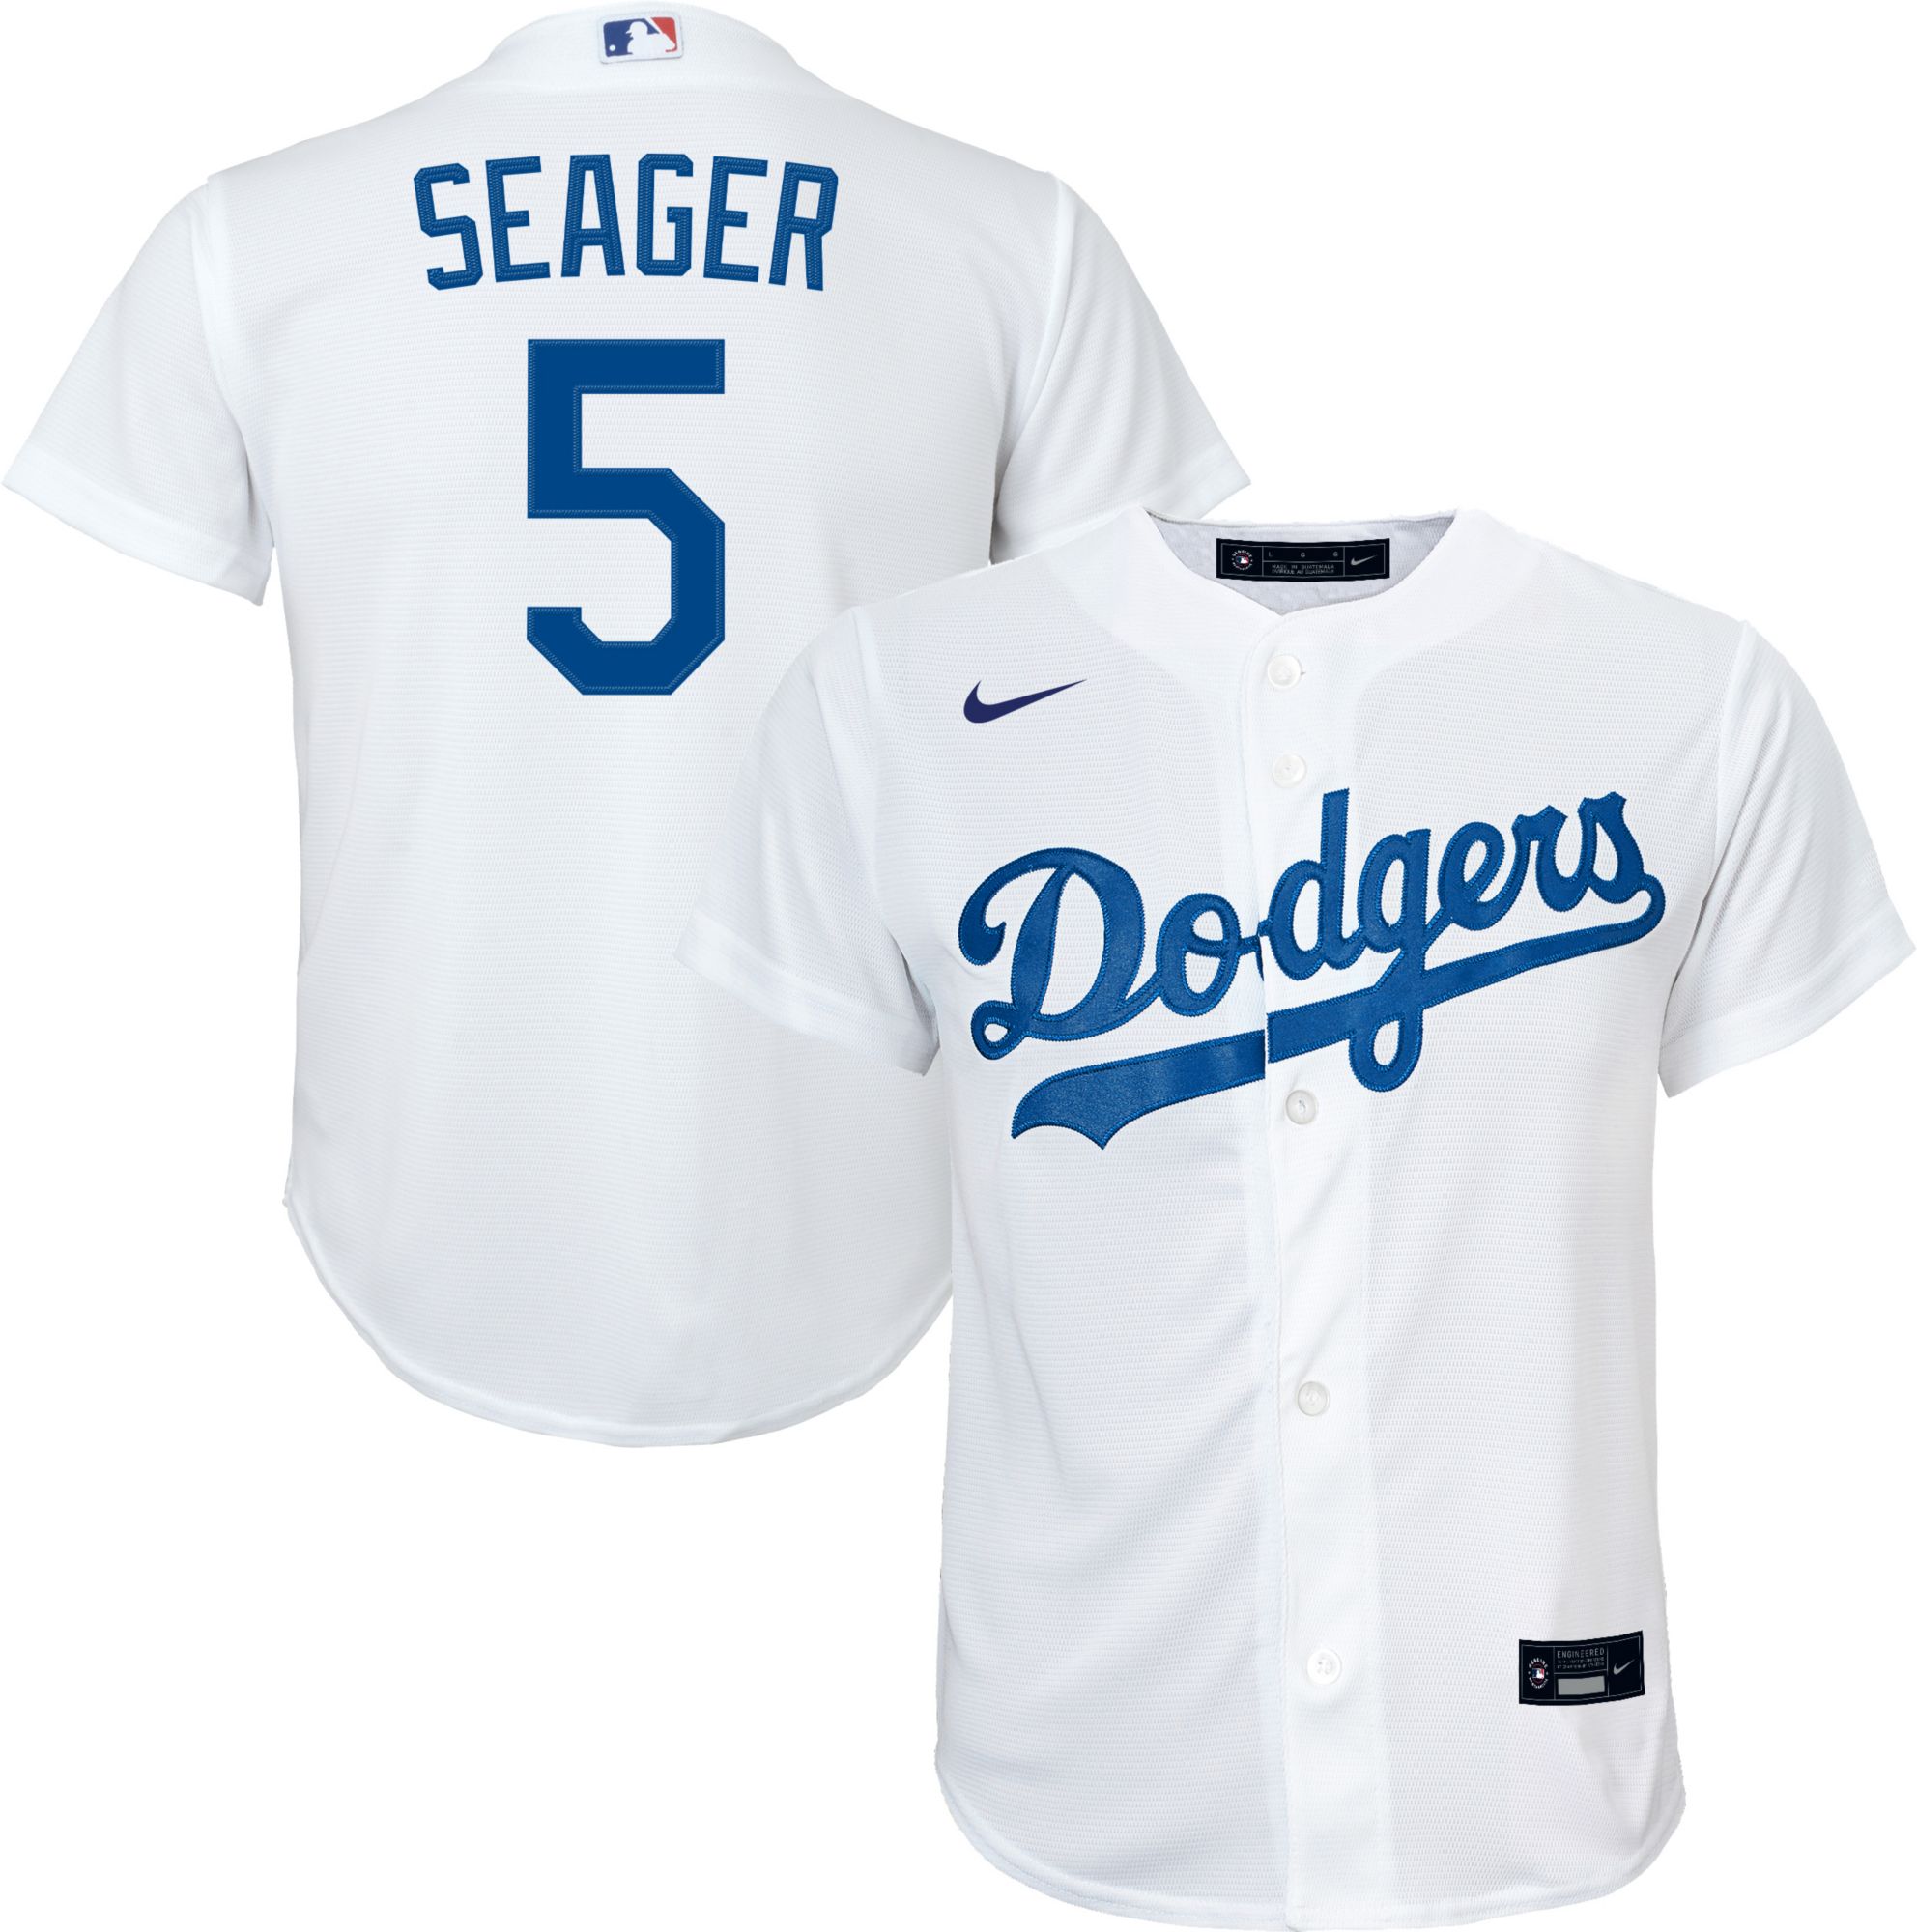 corey seager jersey for sale